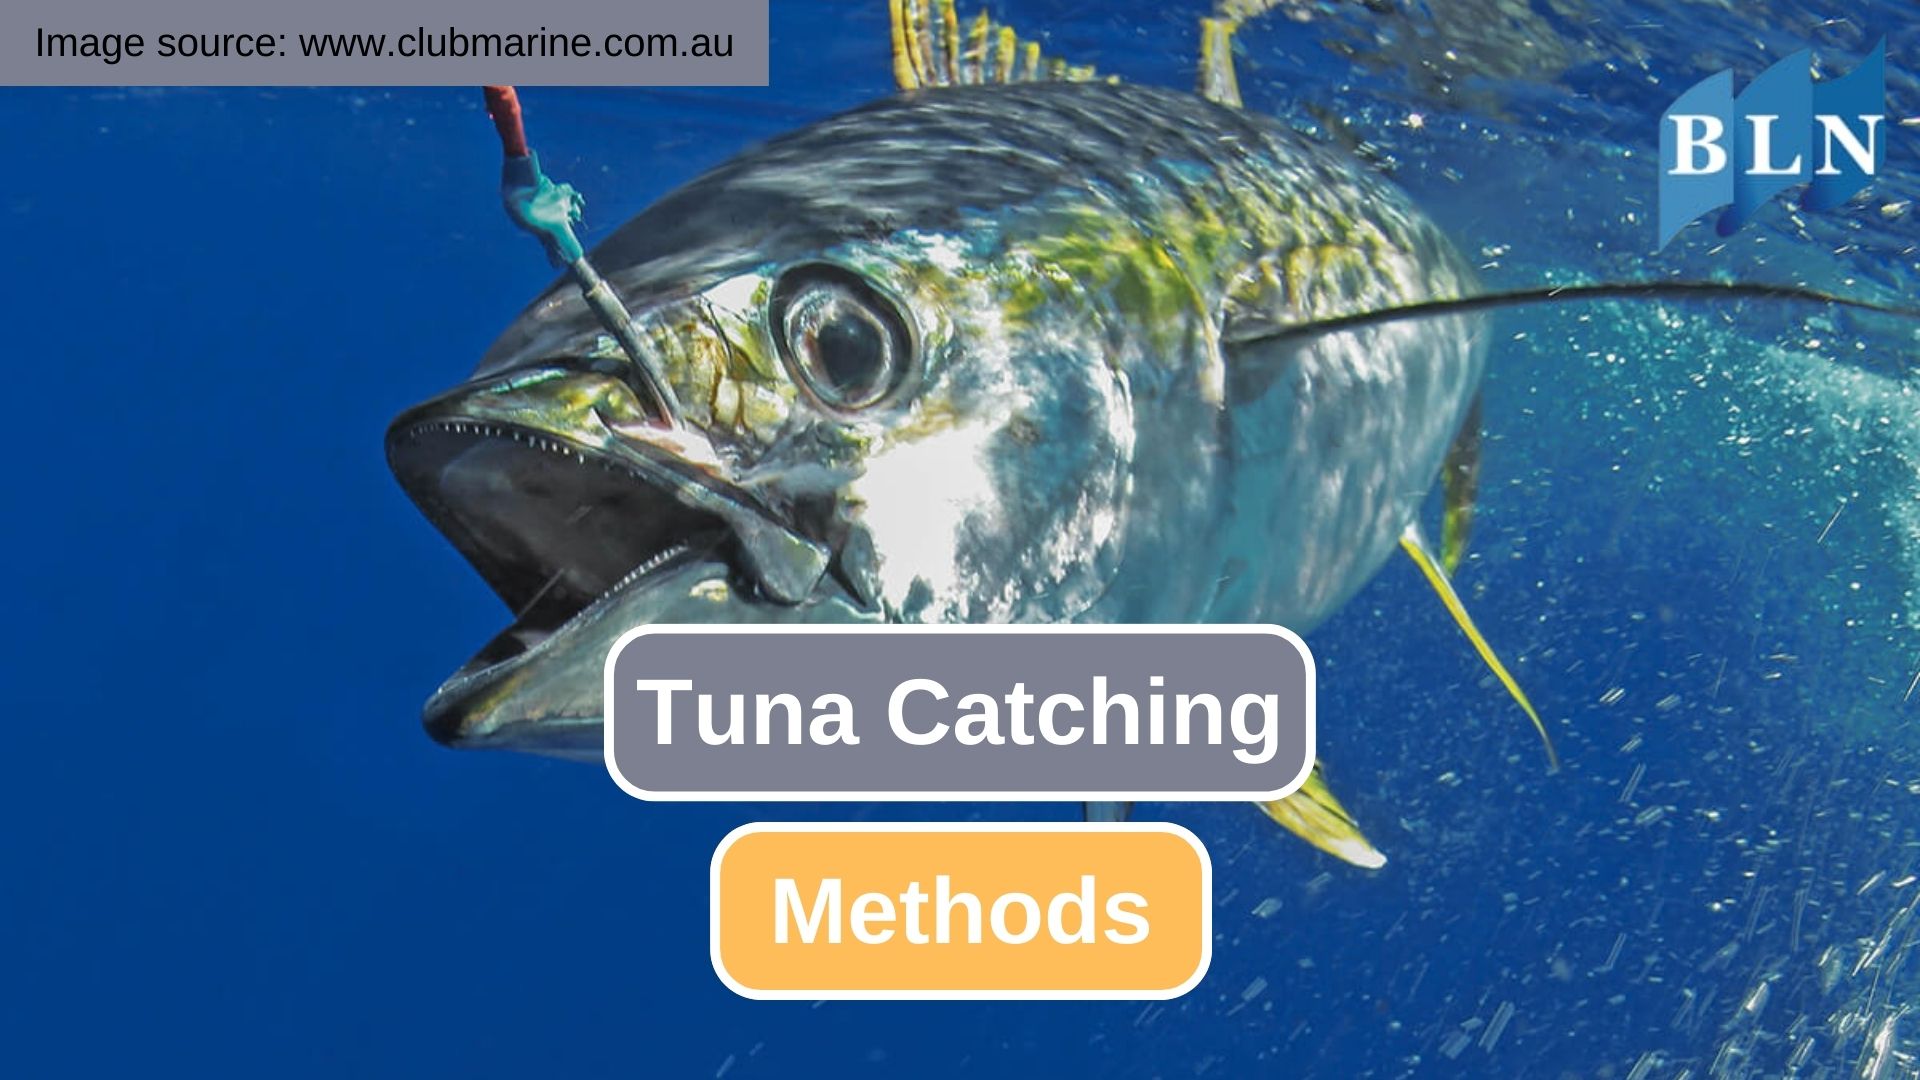 Here Are Some Common Tuna Catching Techniques